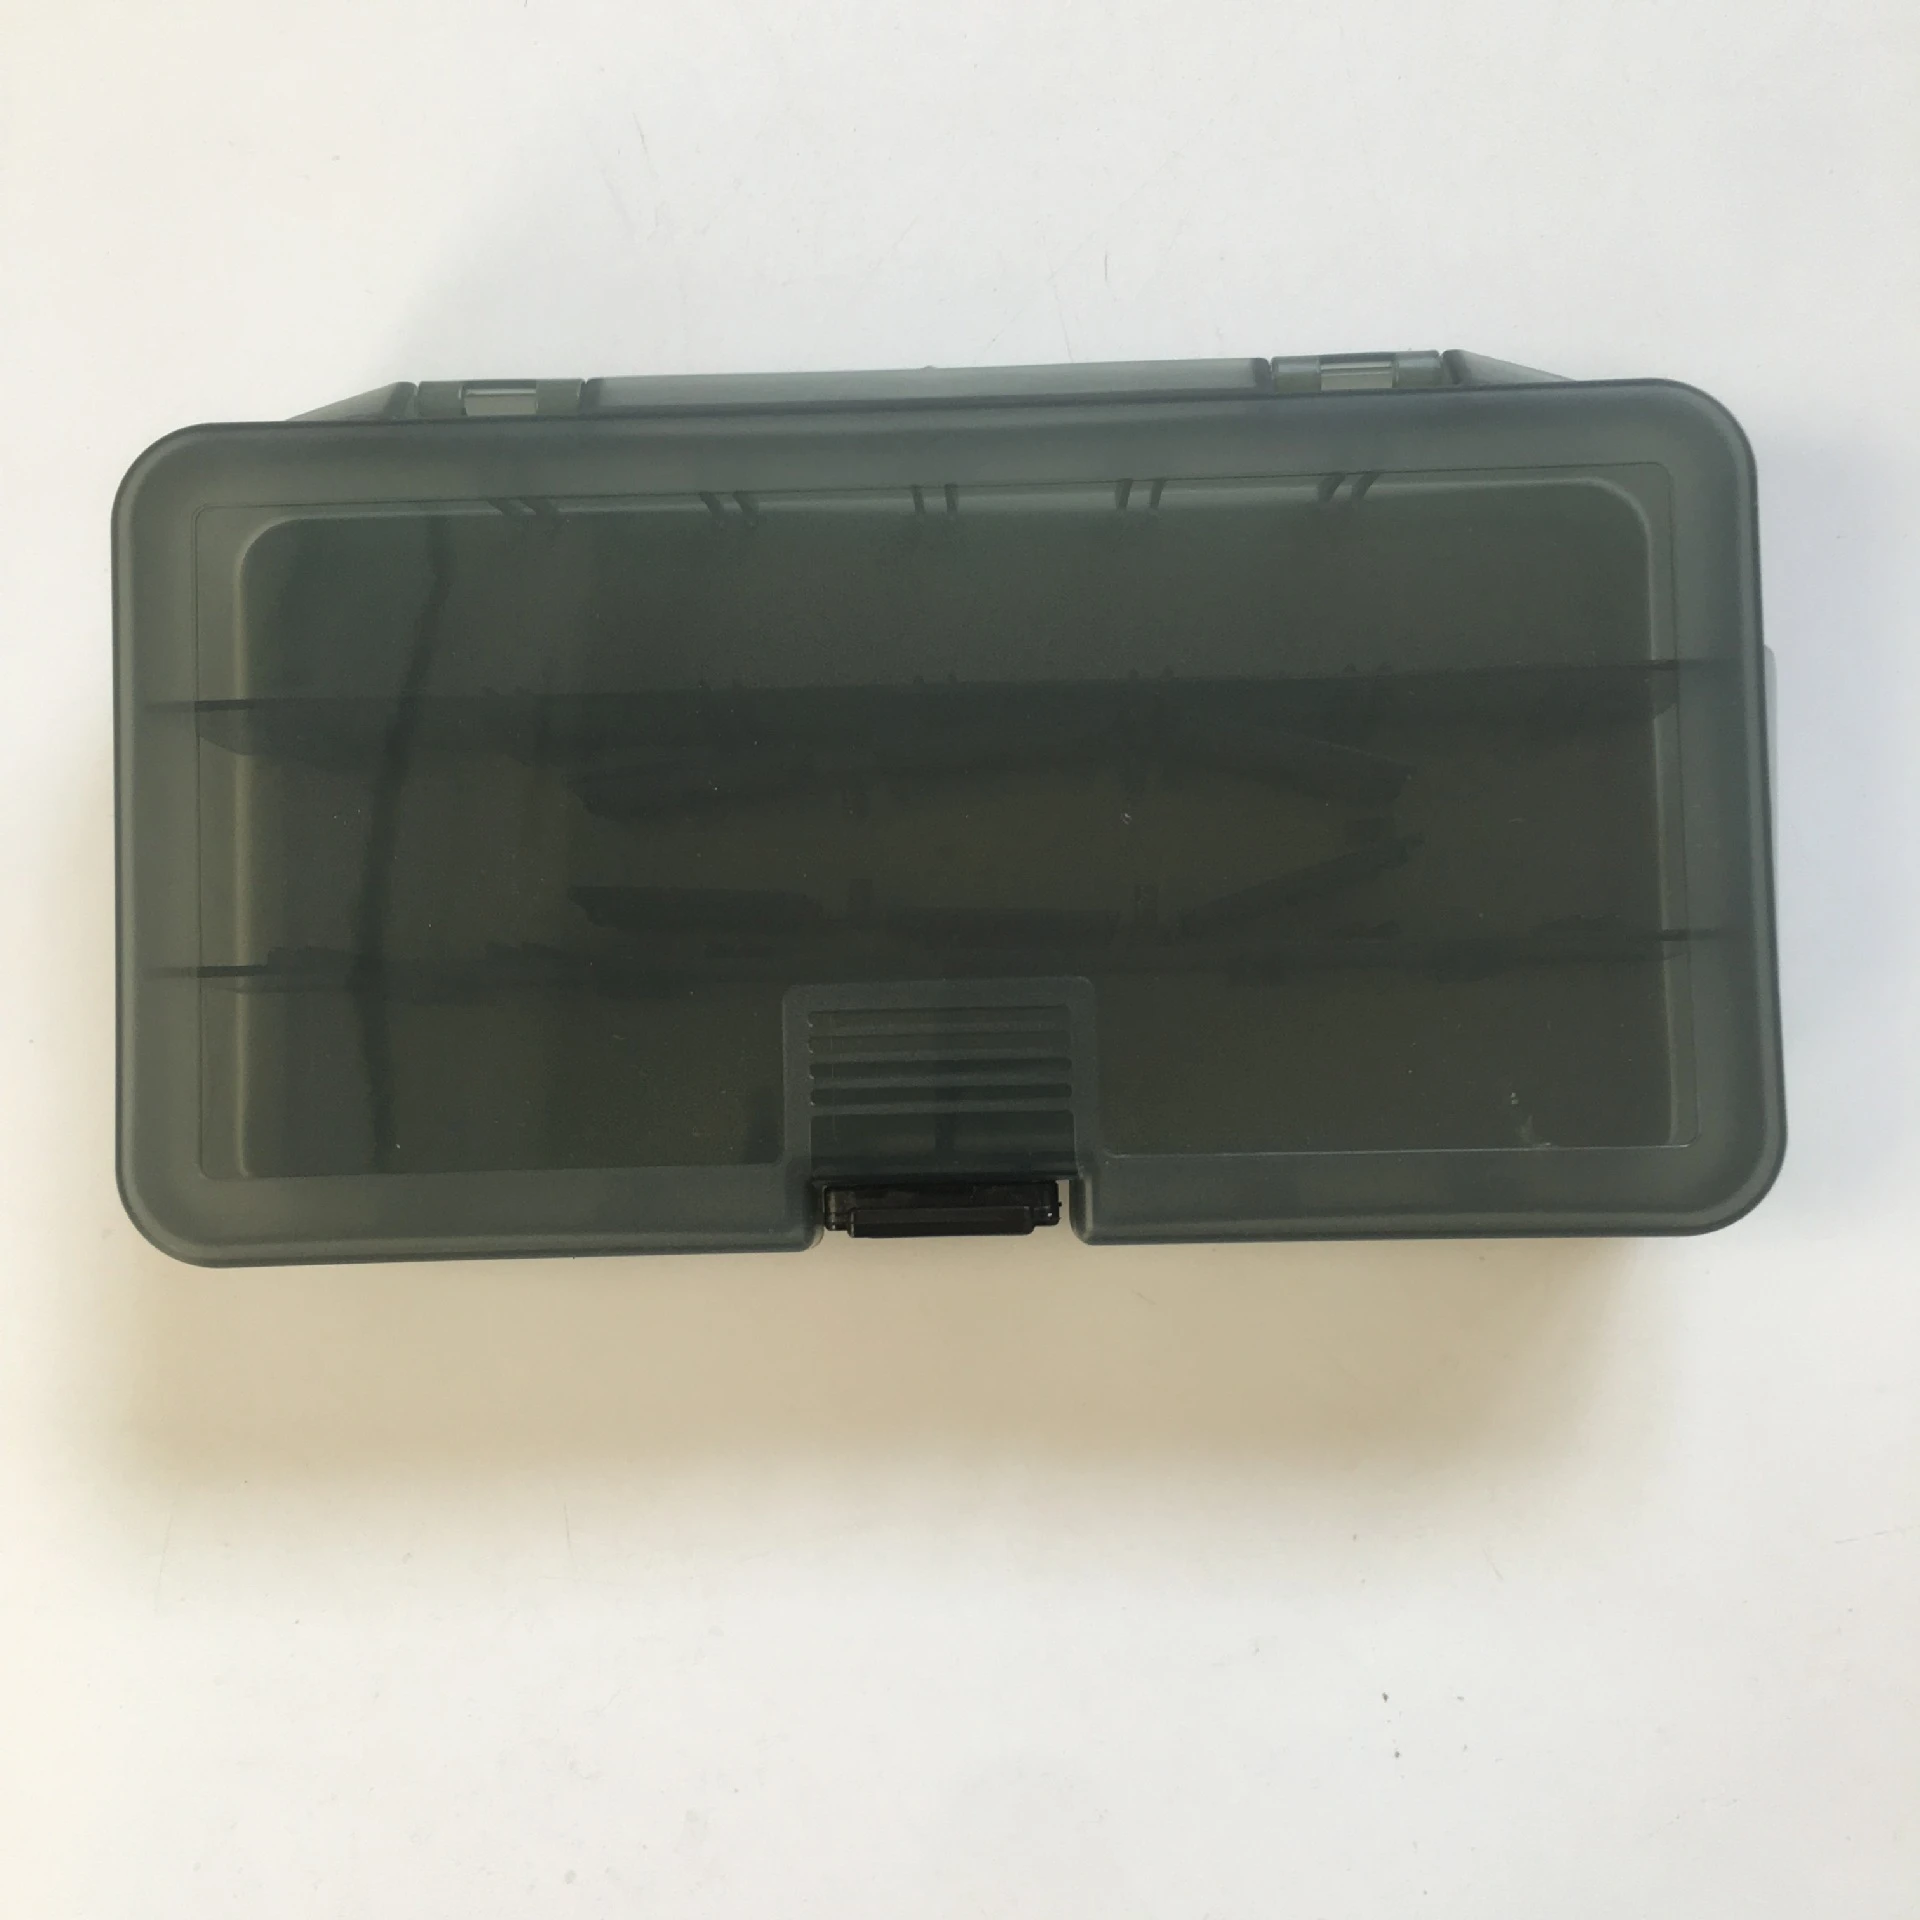 Fishing Plastic Box Wholesale Two kinds of Fishing Box Storage Easy Carry Tackle Box Fishing Lure